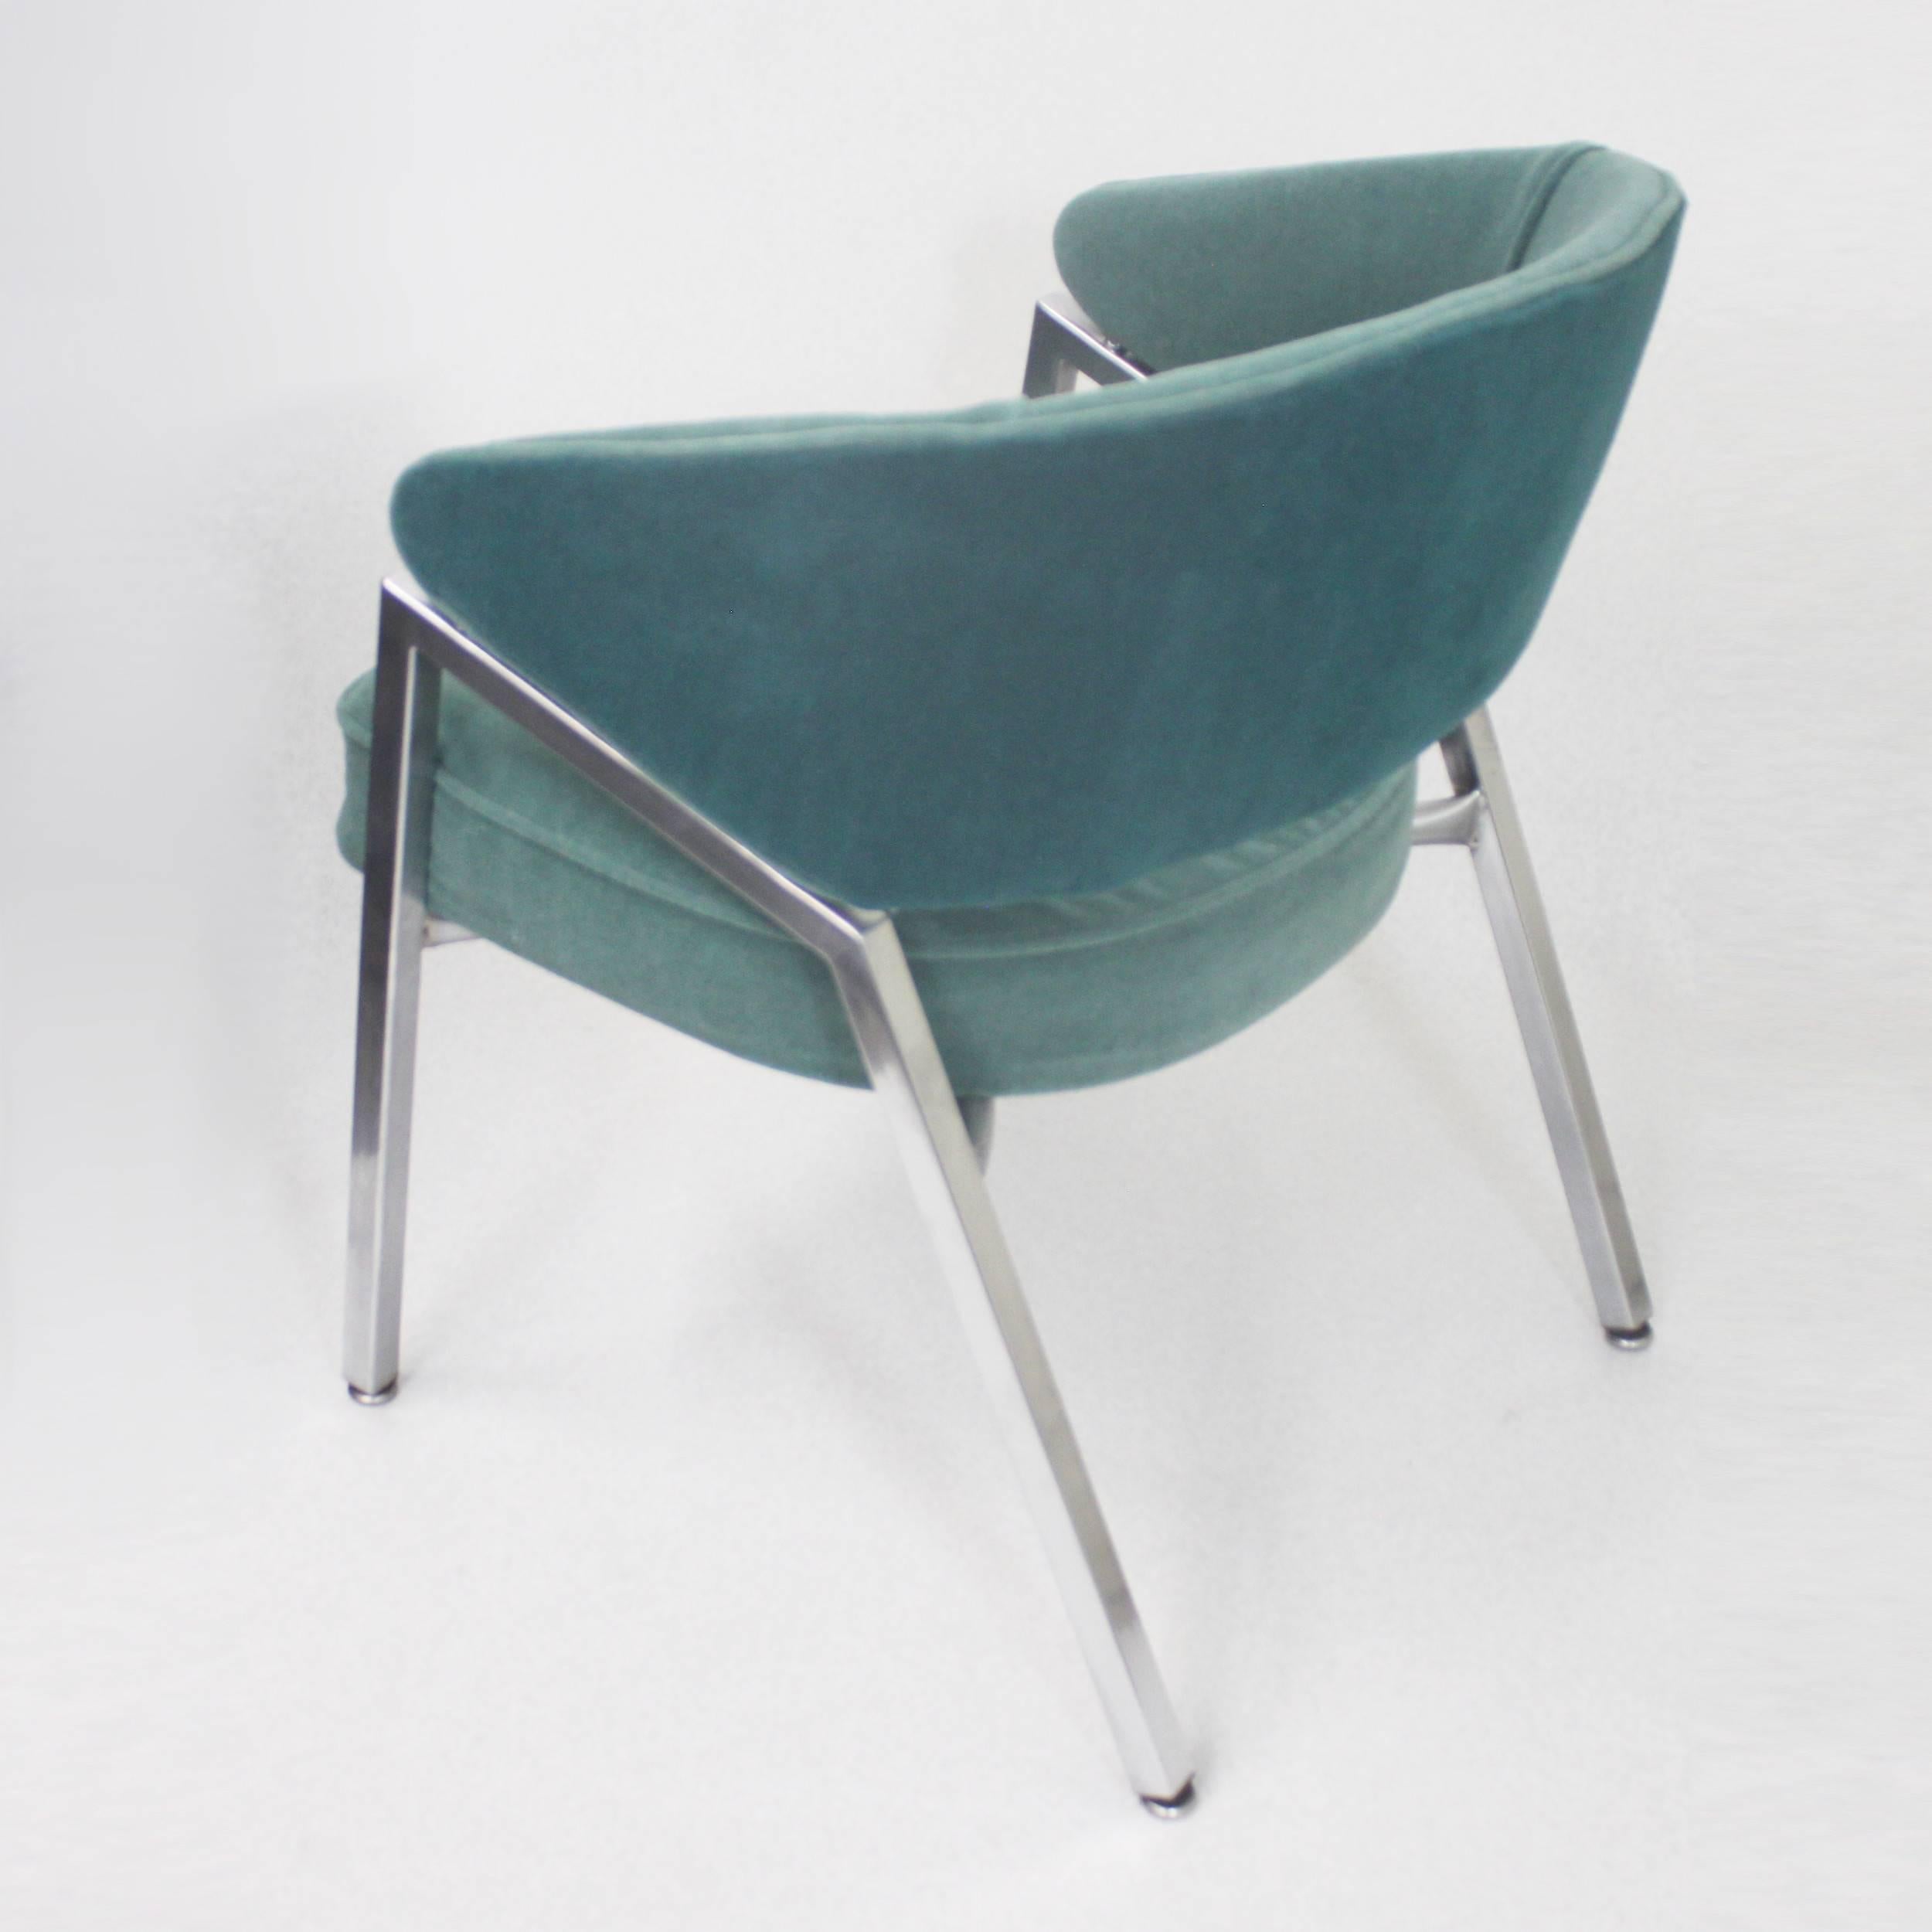 Rare Pair of 1970s Mid-Century Modern Teal Green and Chrome Side Arm Chairs 2